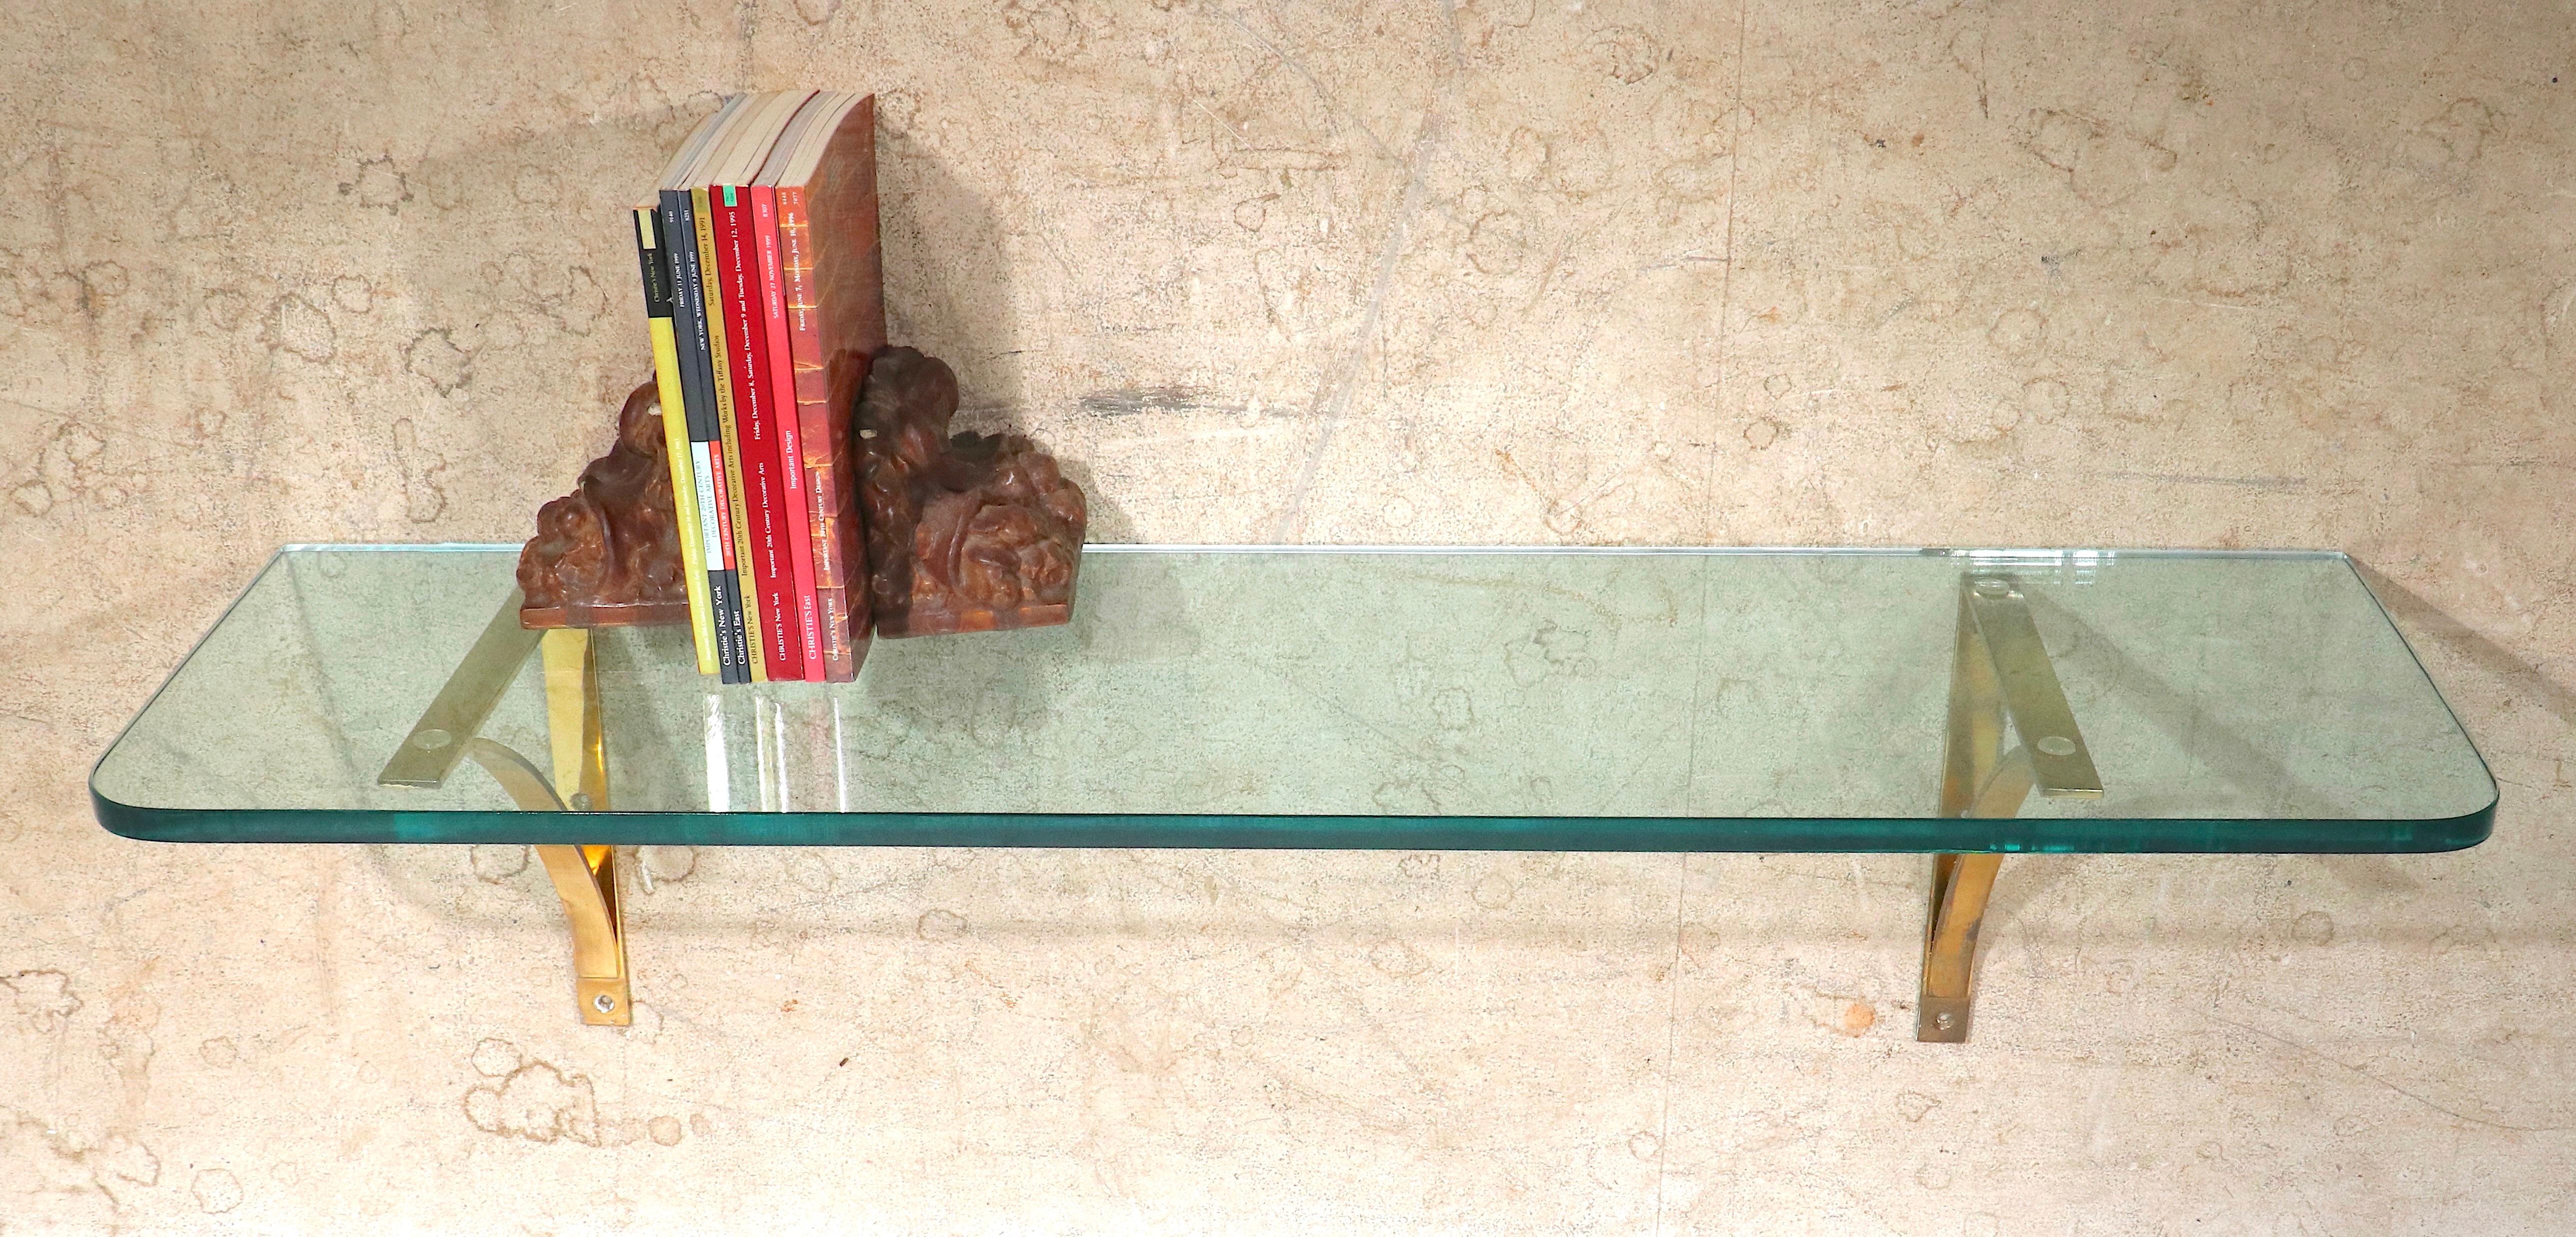 Post Modern Plate Glass and Brass Wall Mount Shelf, C. 1970's For Sale 1